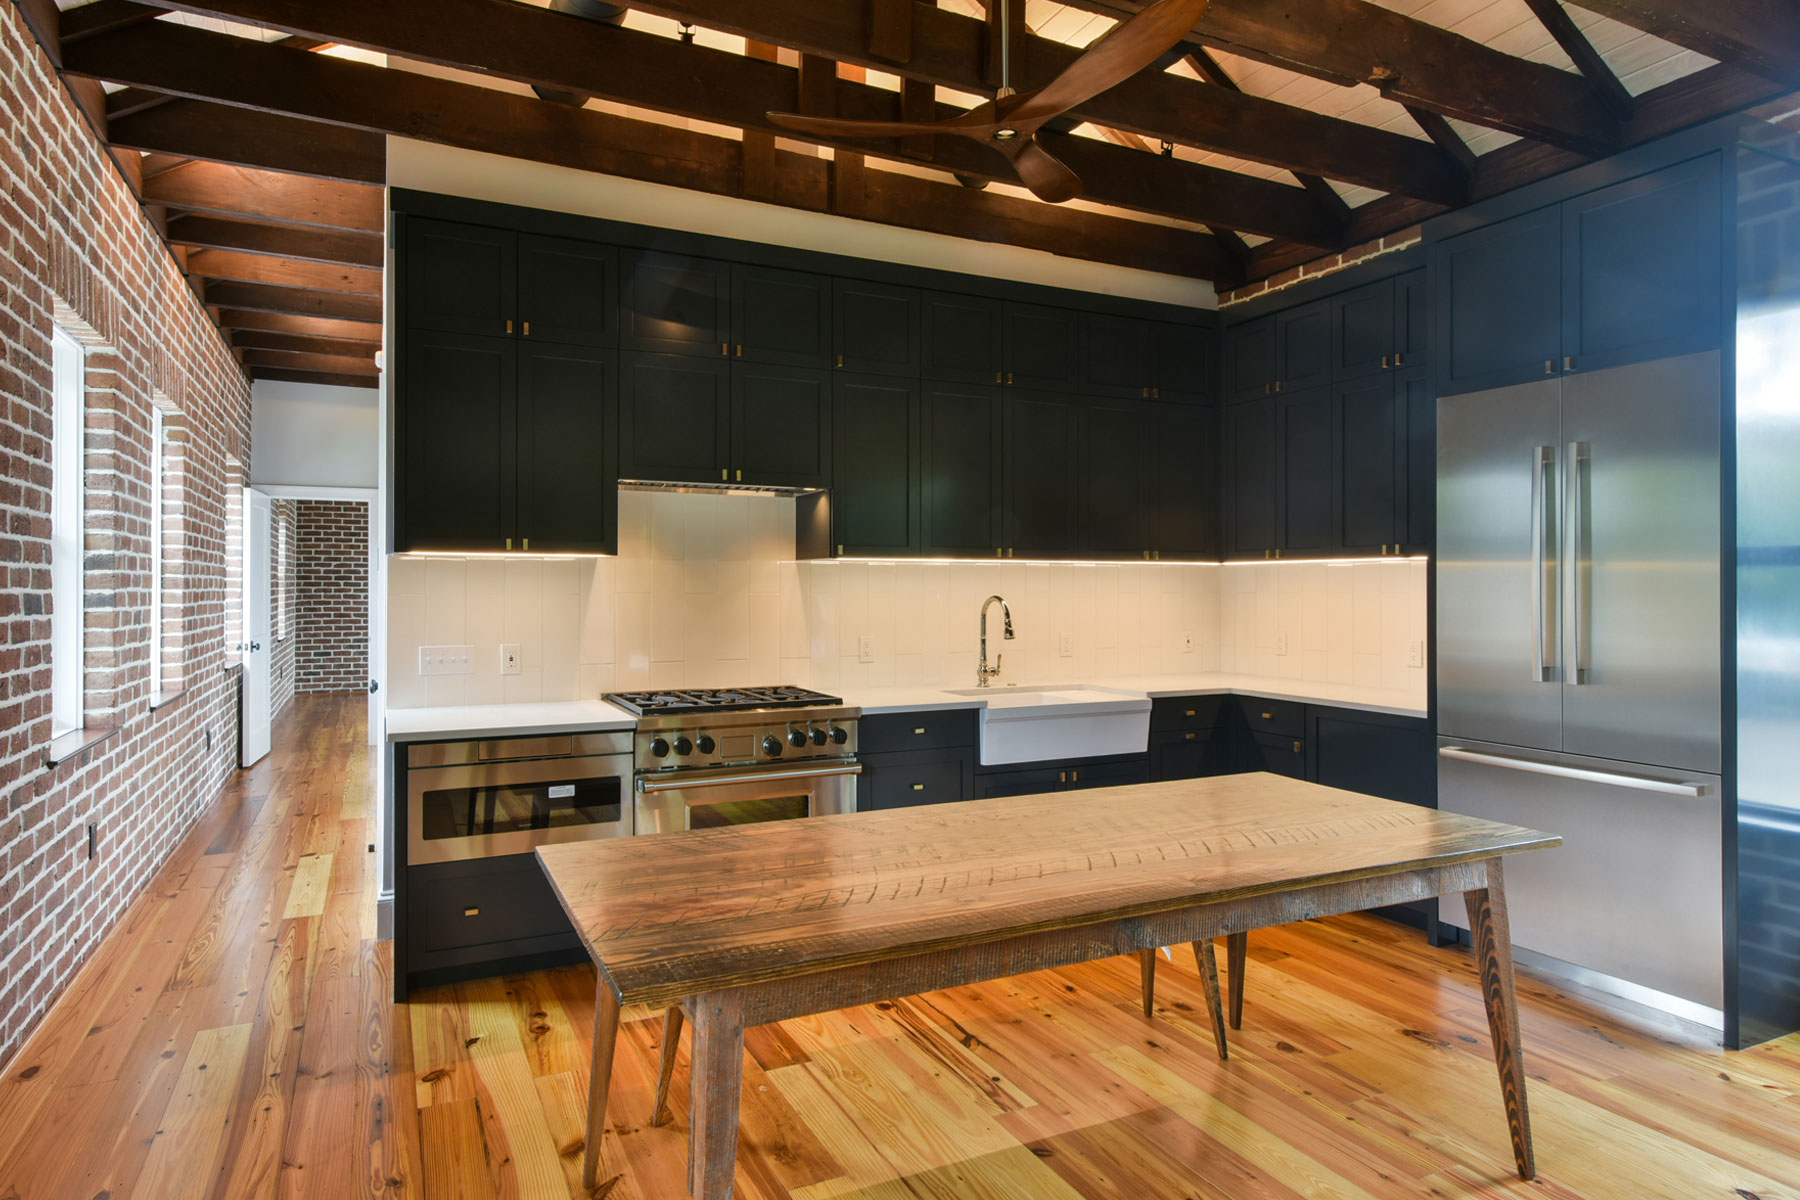 Modern coastal kitchen with navy blue cabinets and white tile backsplash designed by Swallowtail Architecture in Sullivan's Island, SC